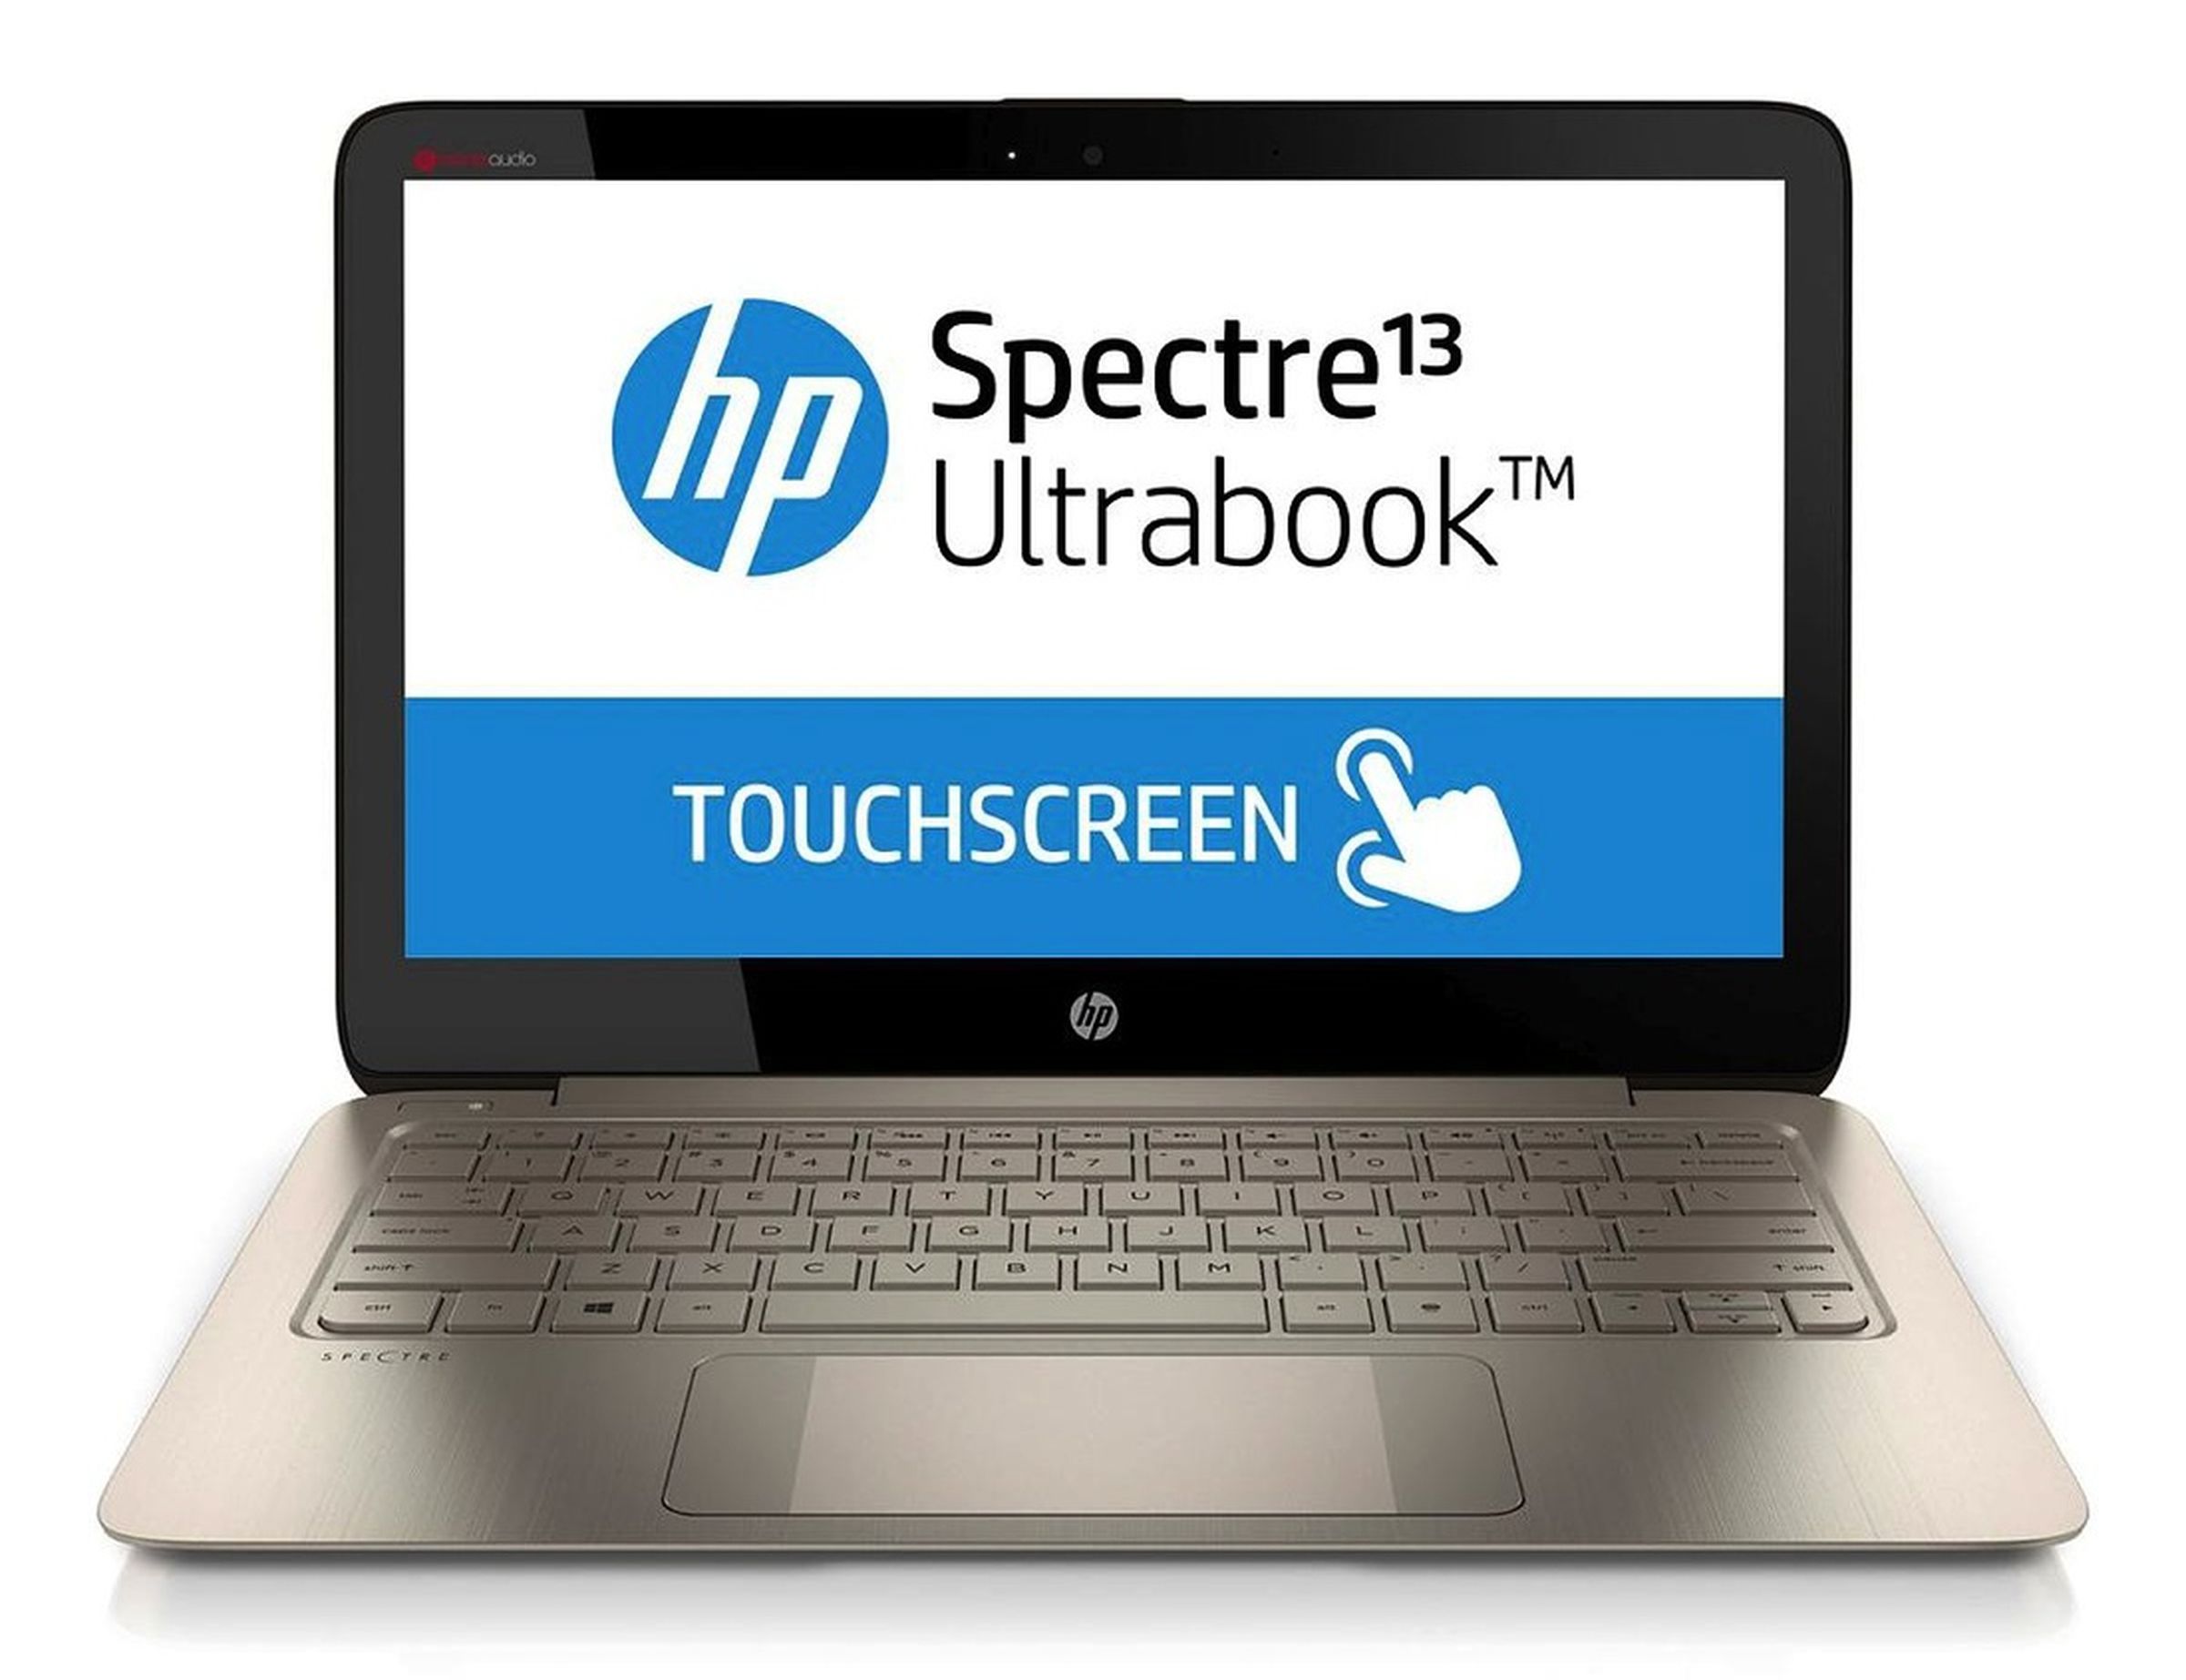 HP Spectre x2, Pavilion x2, and Spectre 13 Ultrabook press pictures